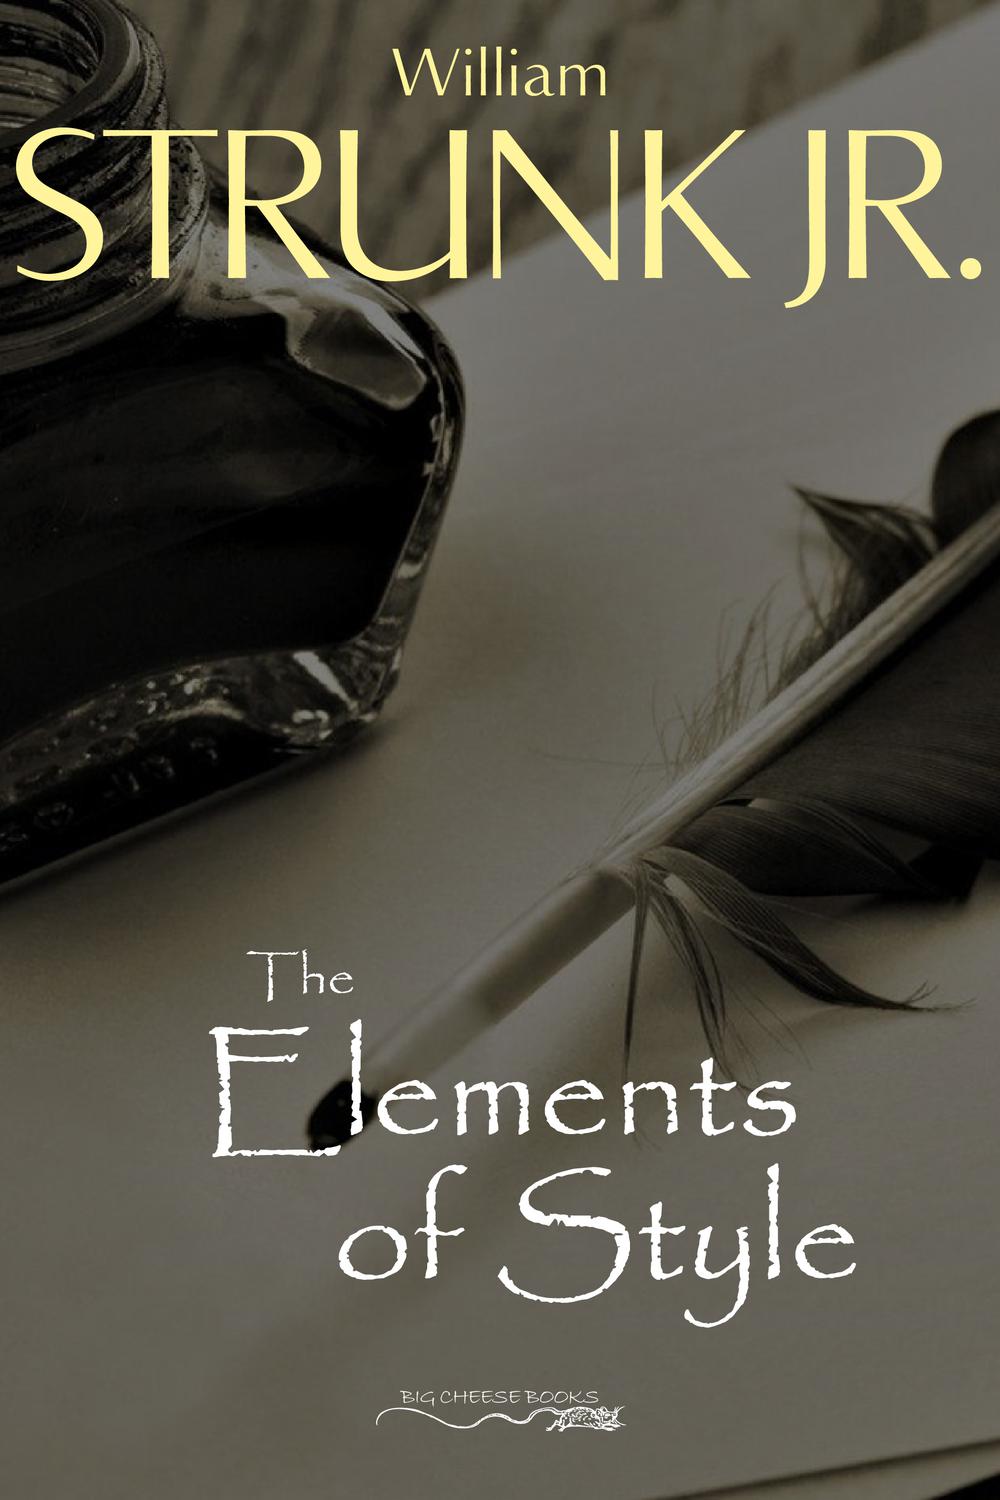 The Elements of Style, Fourth Edition - William Strunk, Jr., E.B. White